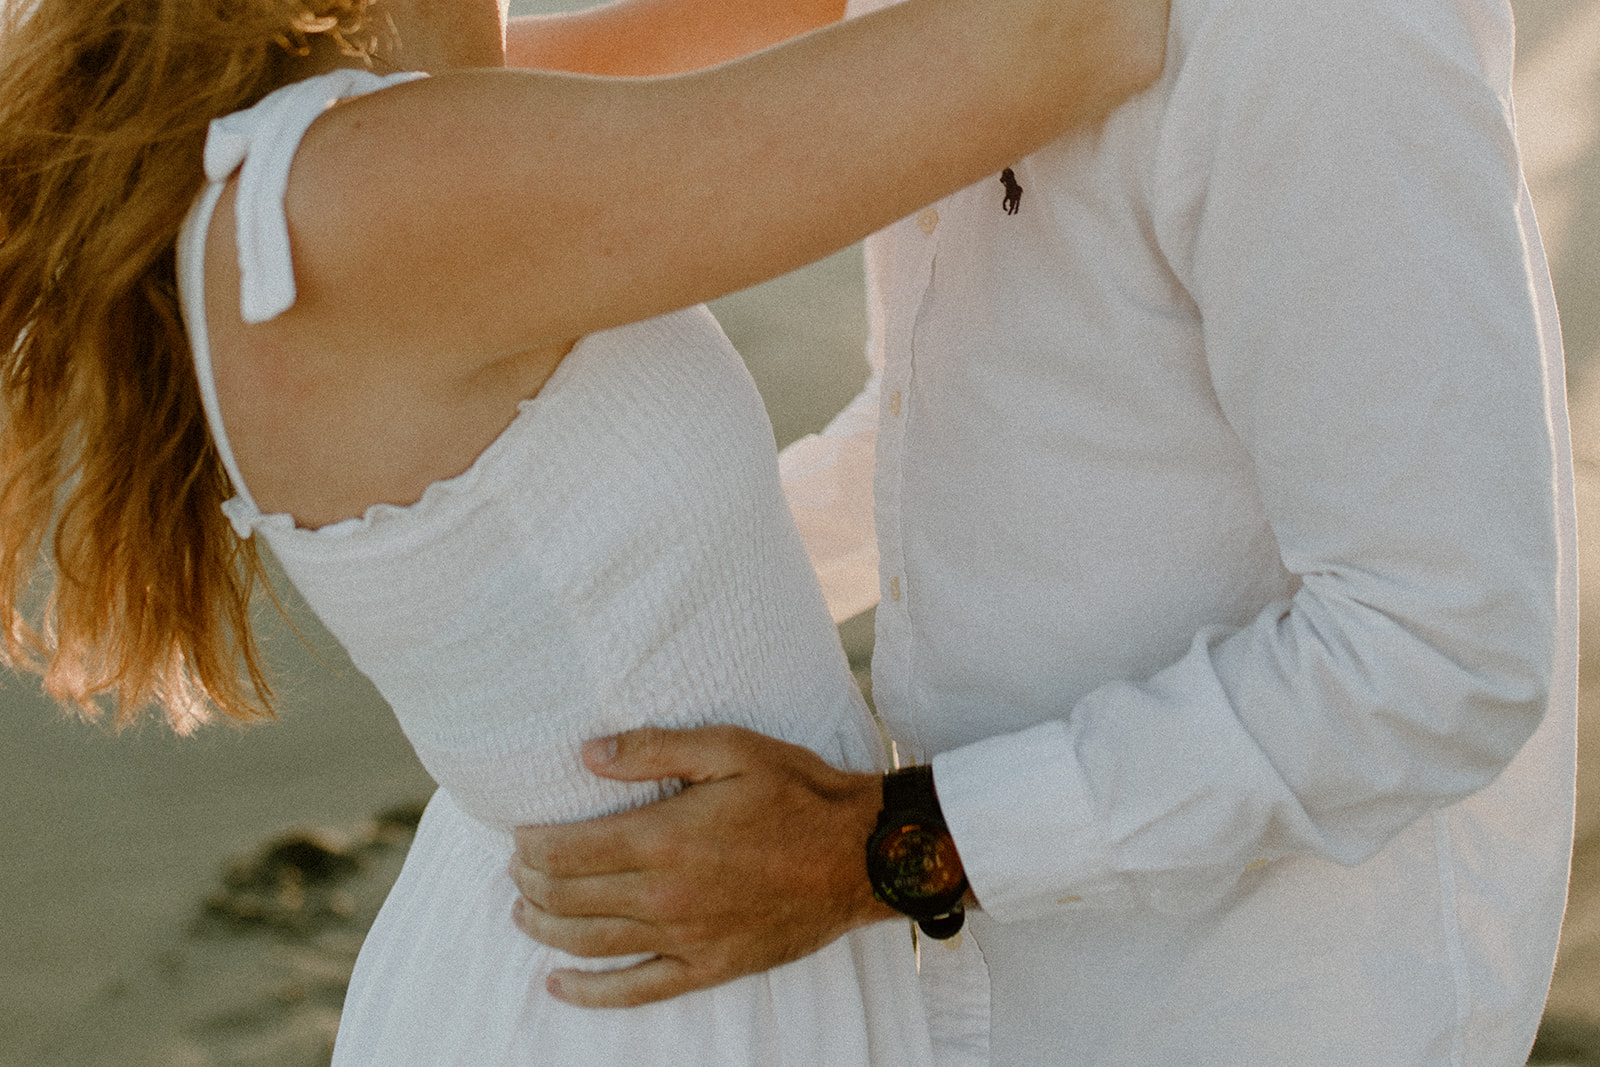 Couple session in South Carolina by Sullivan Taylor, wedding and elopement photographer for Texas and East Coast couples